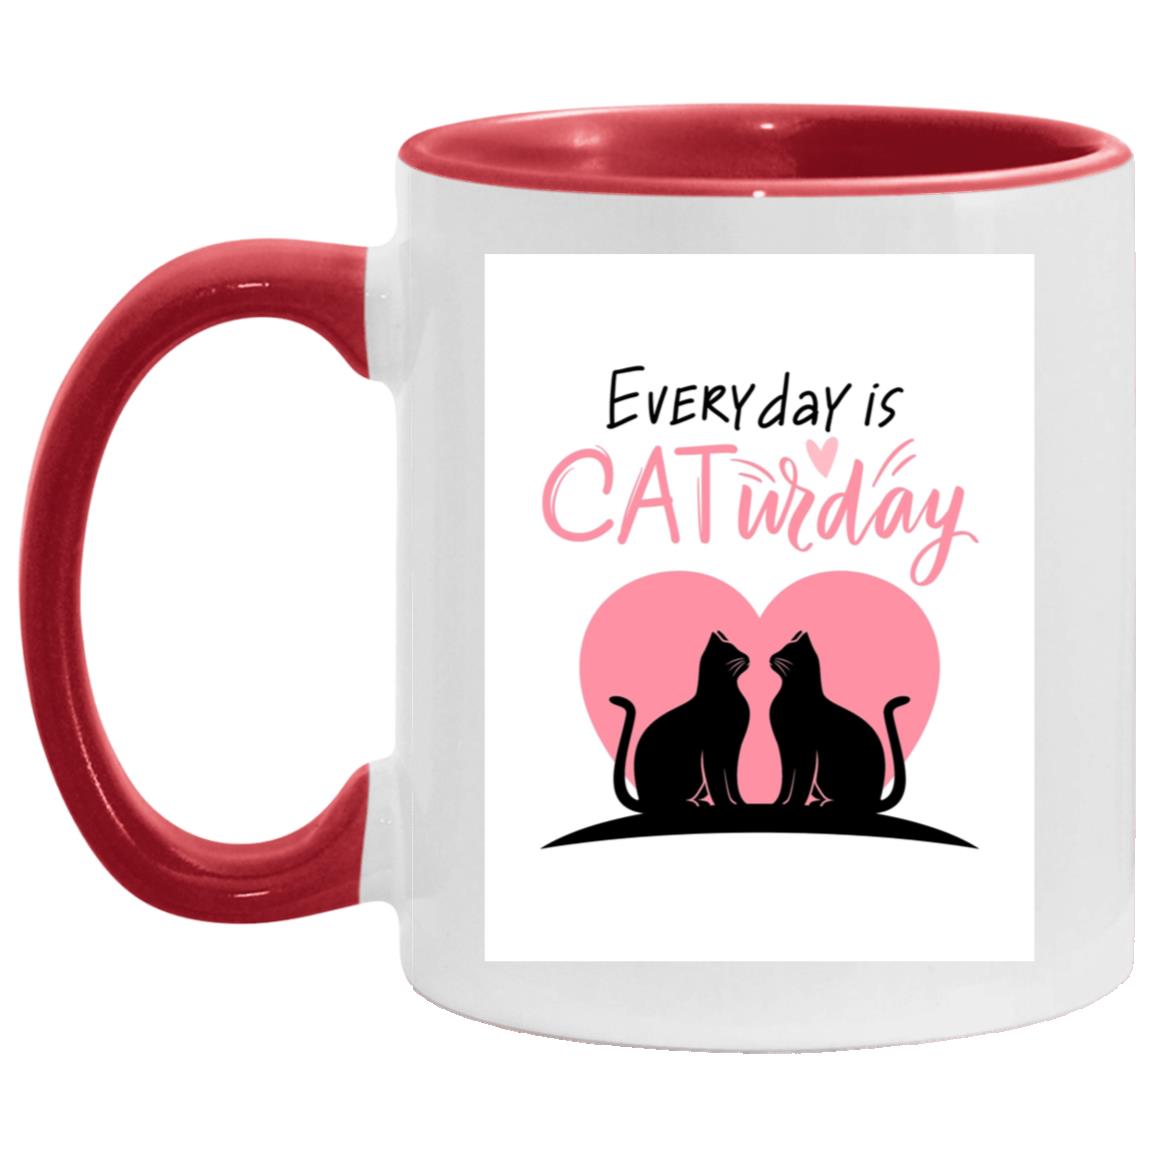 "Everyday is Caturday" 11oz Accent Mug